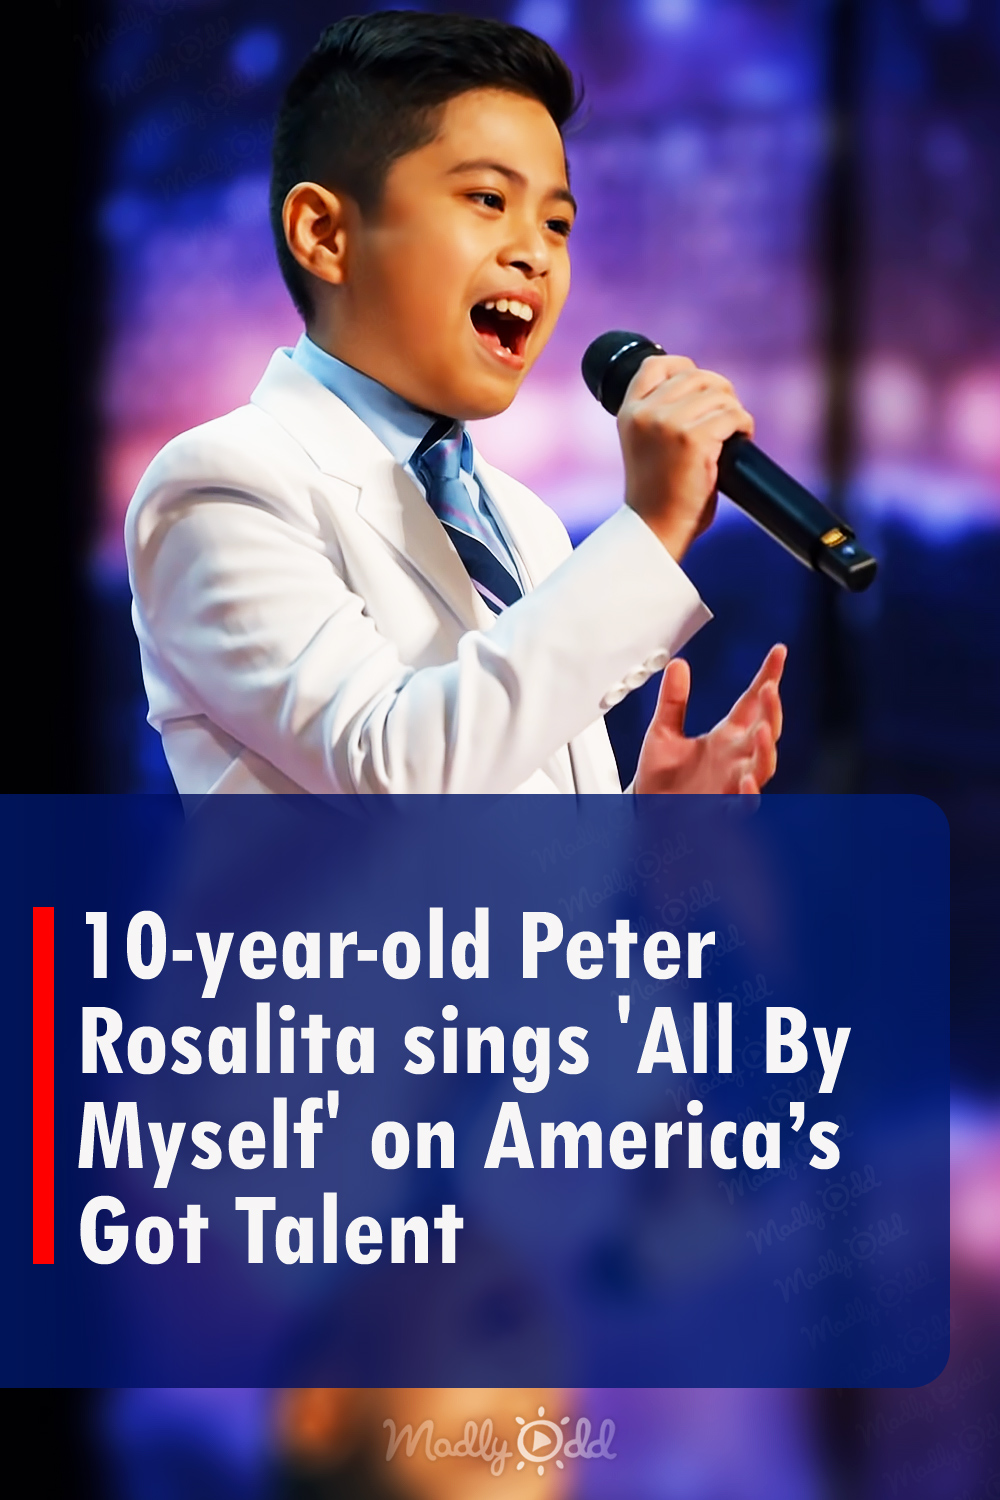 10-year-old Peter Rosalita sings \'All By Myself\' on America’s Got Talent